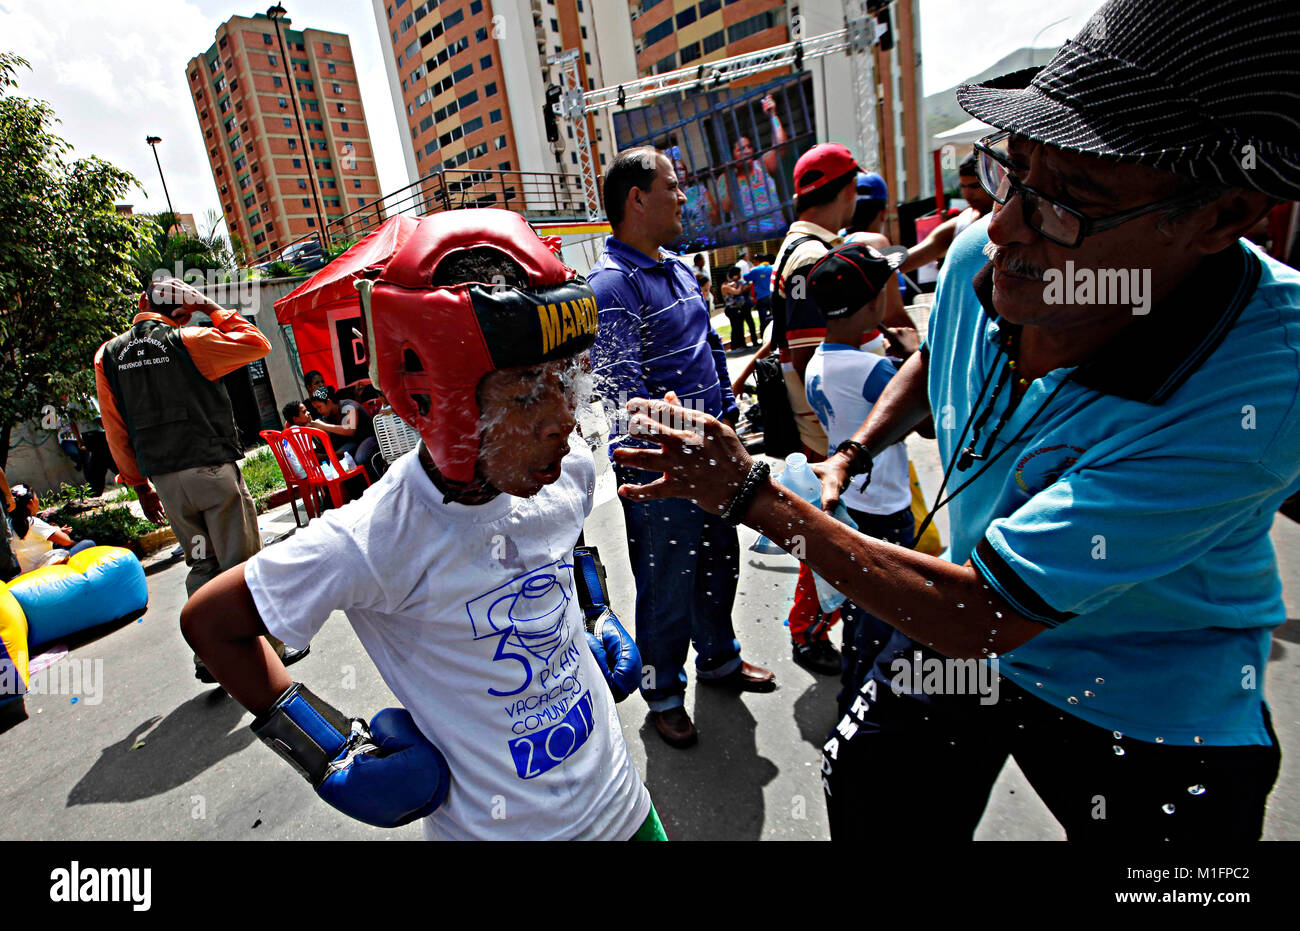 Naguanagua, Carabobo, Venezuela. 28th June, 2012. June 28, 2012. The trainer attends the corner throwing water on his face to his boxer from the boxing talents school of Naguanagua during a bout as a street exhibition, In Naguanagua, Carabobo state, Venezuela. Photo: Juan Carlos Hernandez Credit: Juan Carlos Hernandez/ZUMA Wire/Alamy Live News Stock Photo